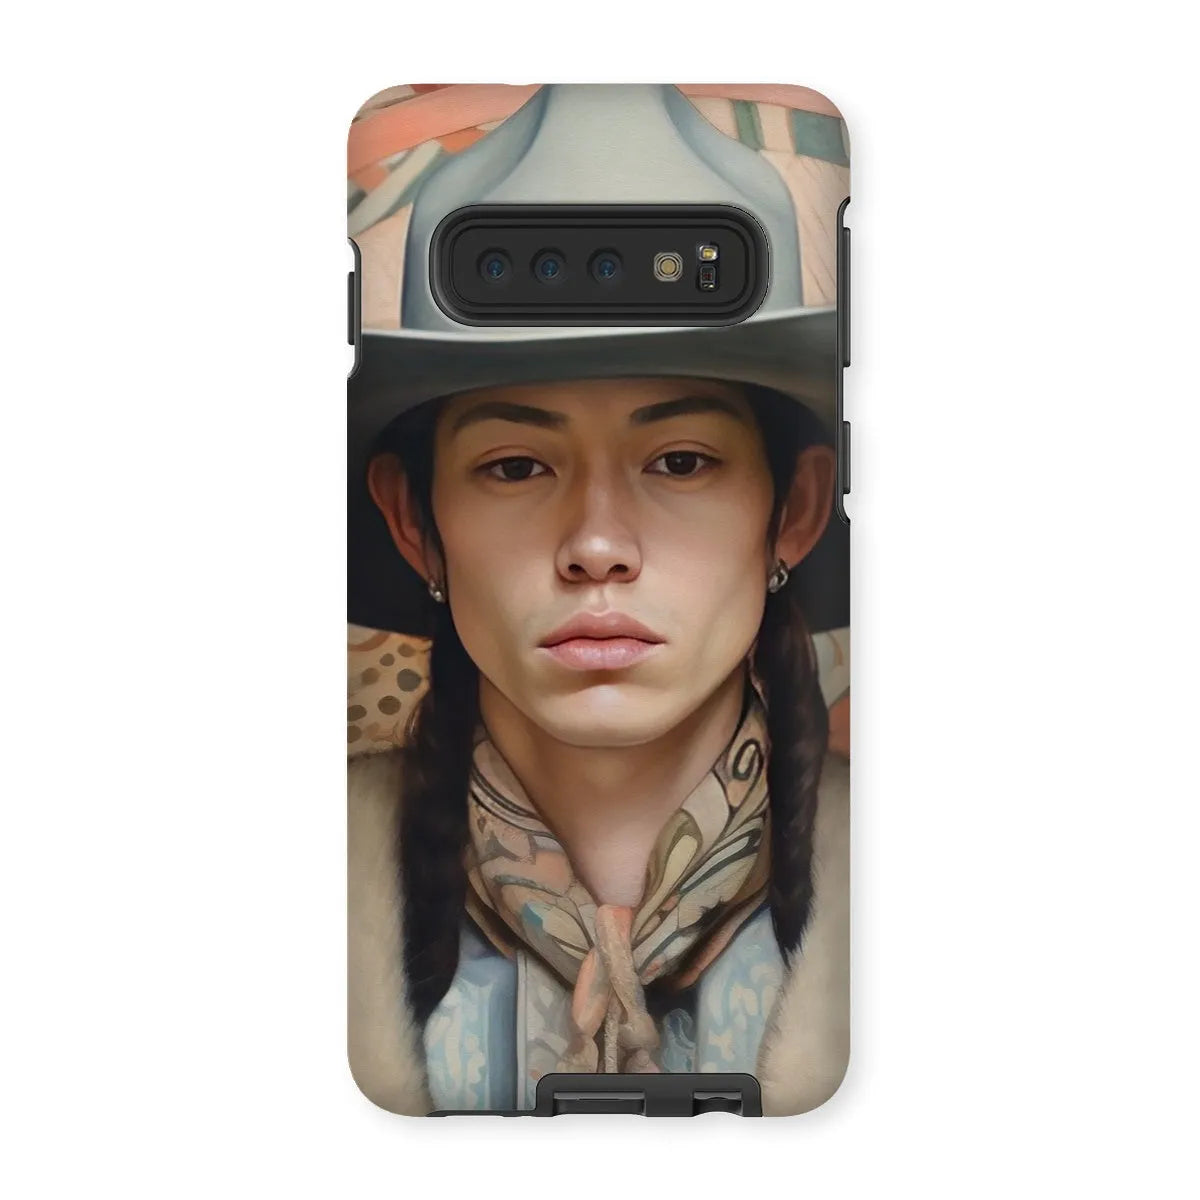 Jacy The Gay Cowboy - Dandy Gay Aesthetic Art Phone Case - Samsung Galaxy S10 / Matte - Mobile Phone Cases - Aesthetic